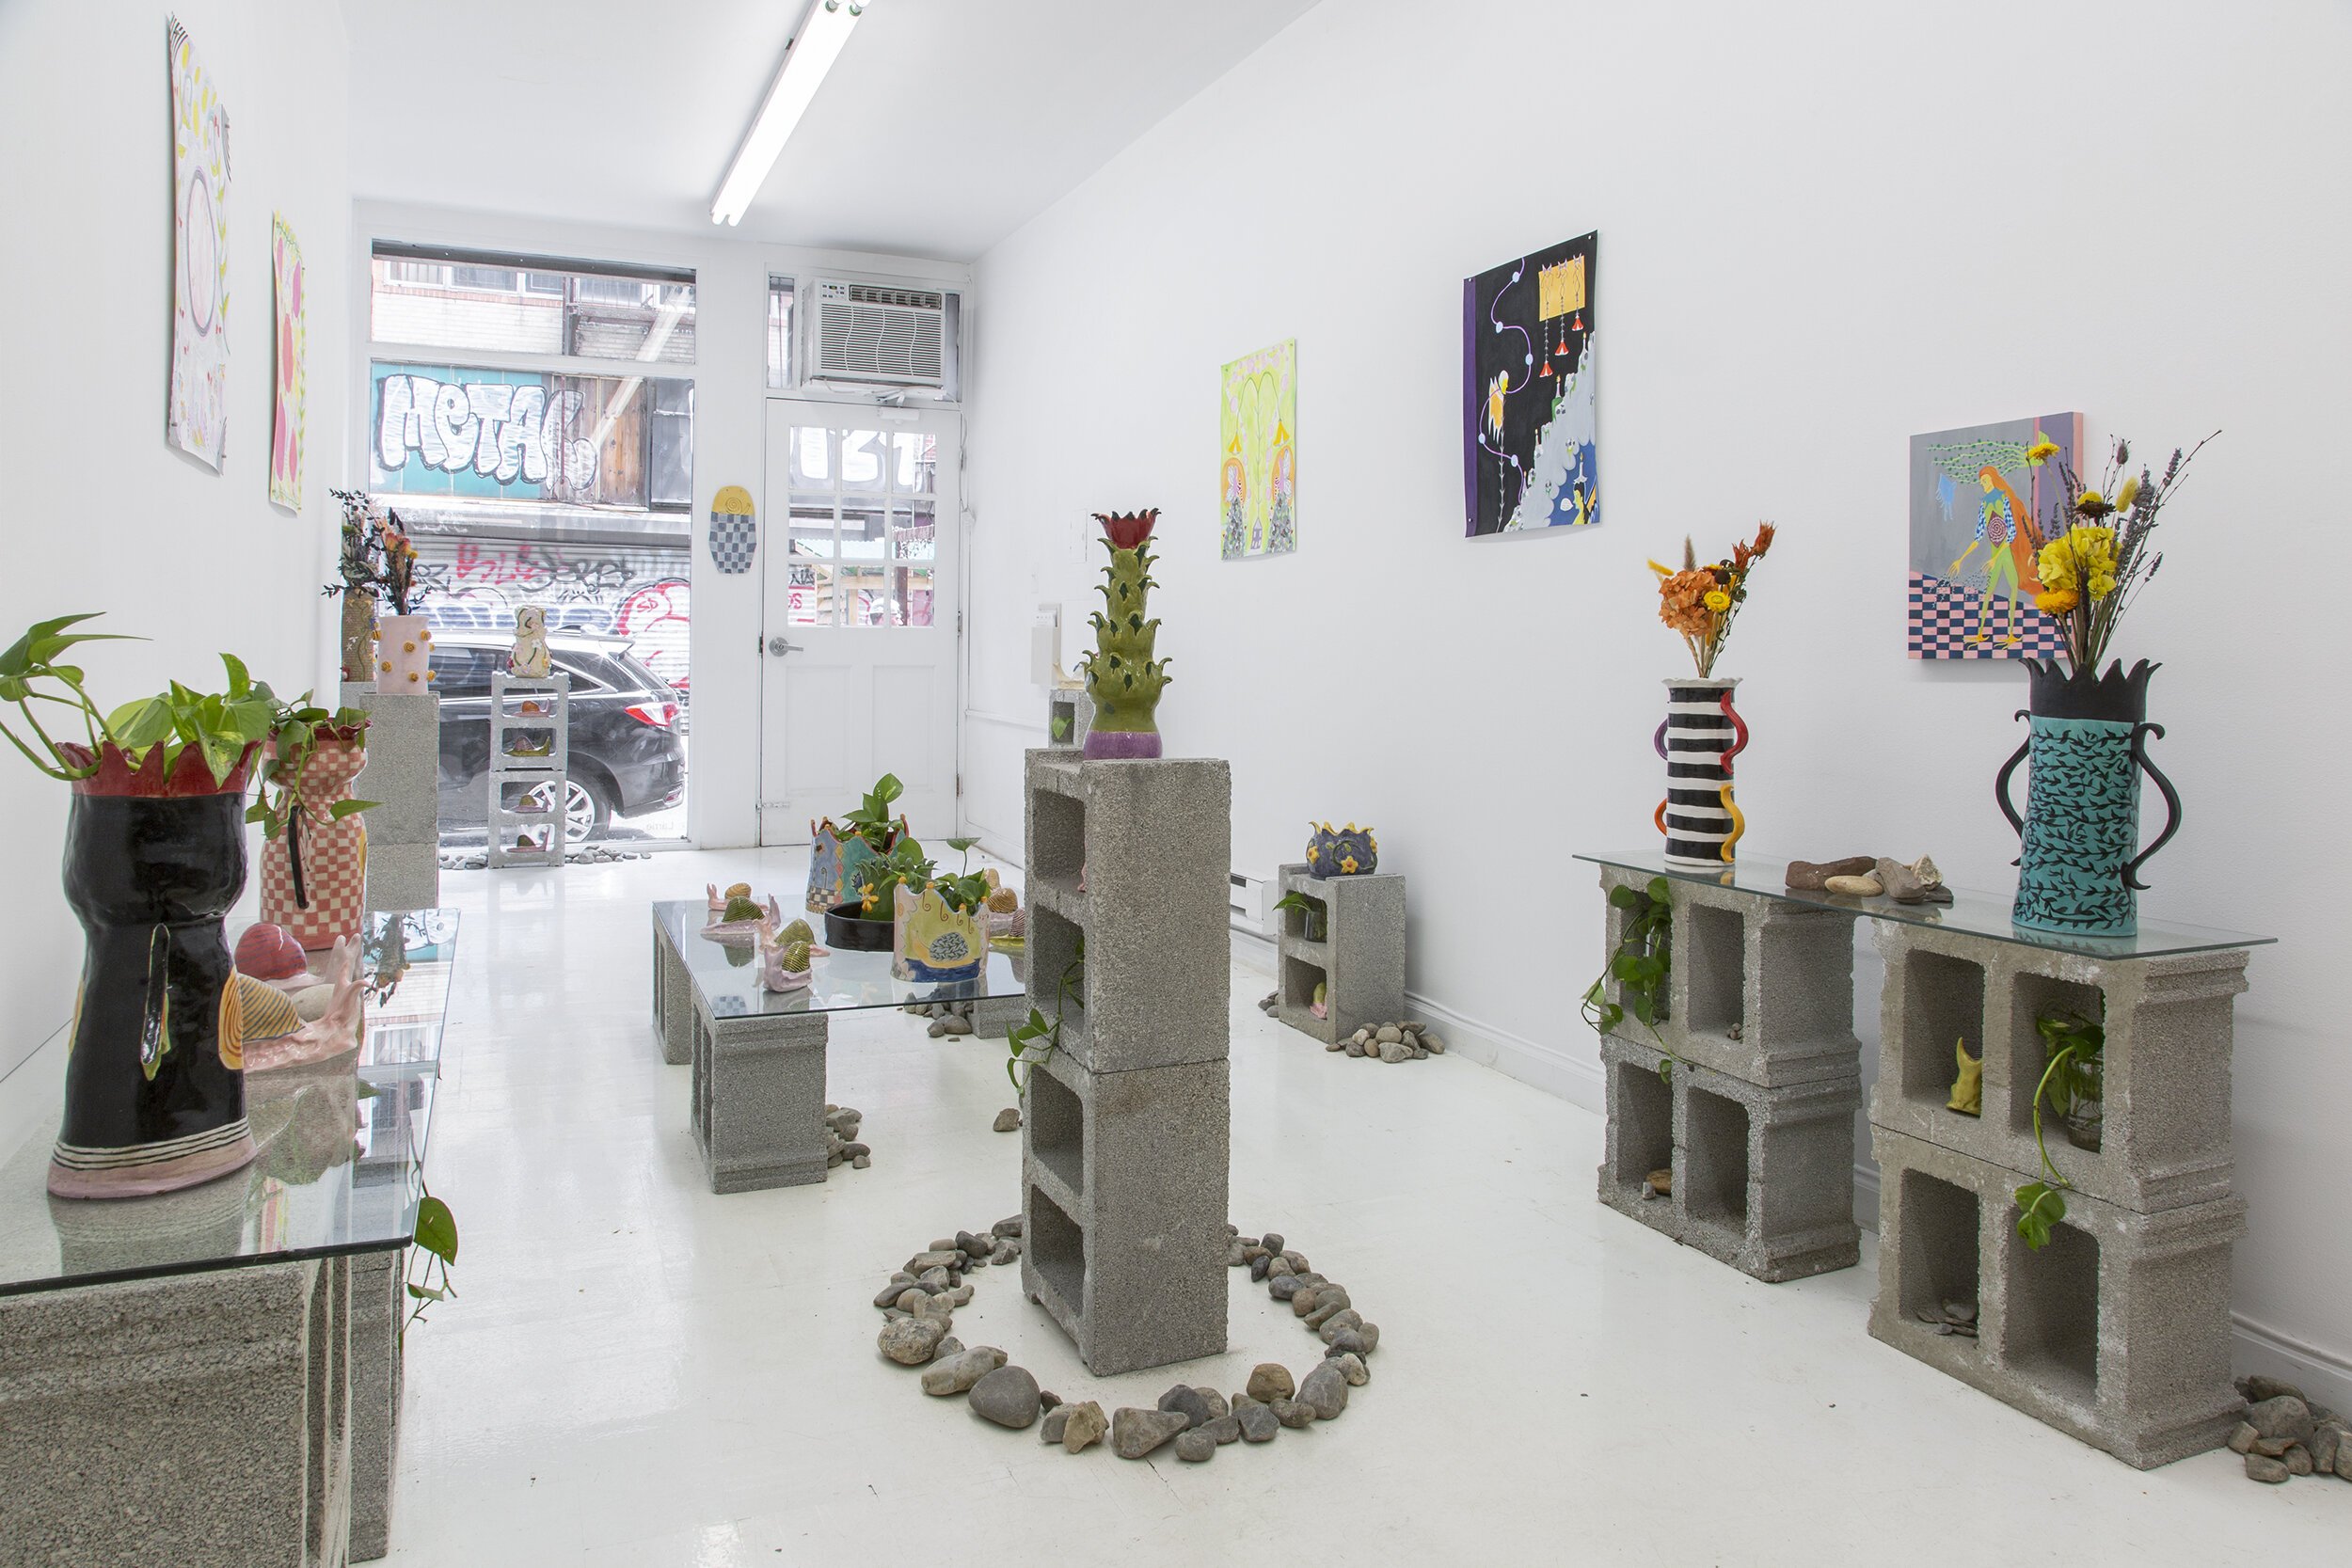  Installation image from: “Spiral in Stone,” 2021  Larrie Gallery 